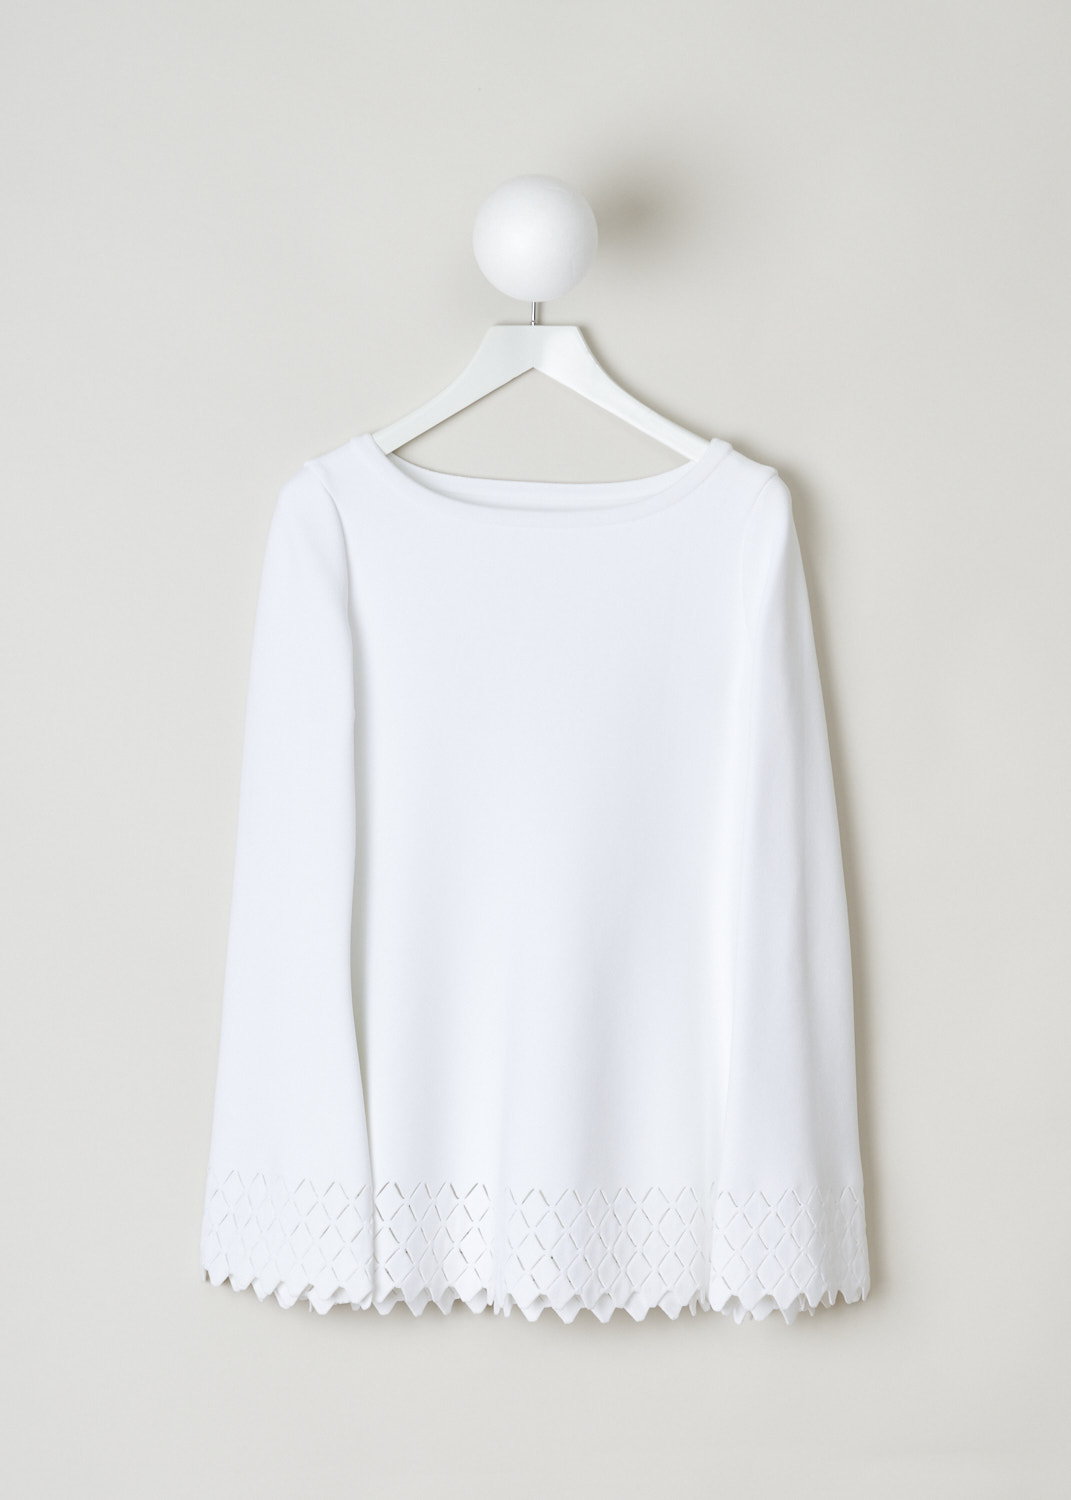 Alaïa, White A-line top with diamond detailing, 8S9UE80LM381_C000, White, Front, White A-line top with a boat neckline. The heavy duty fabric feels sturdy but also stretchy. The cuffs of the long sleeves are adorned with a diamond see-through laser cut hemline. That same hemline can be found across the bottom of the top.